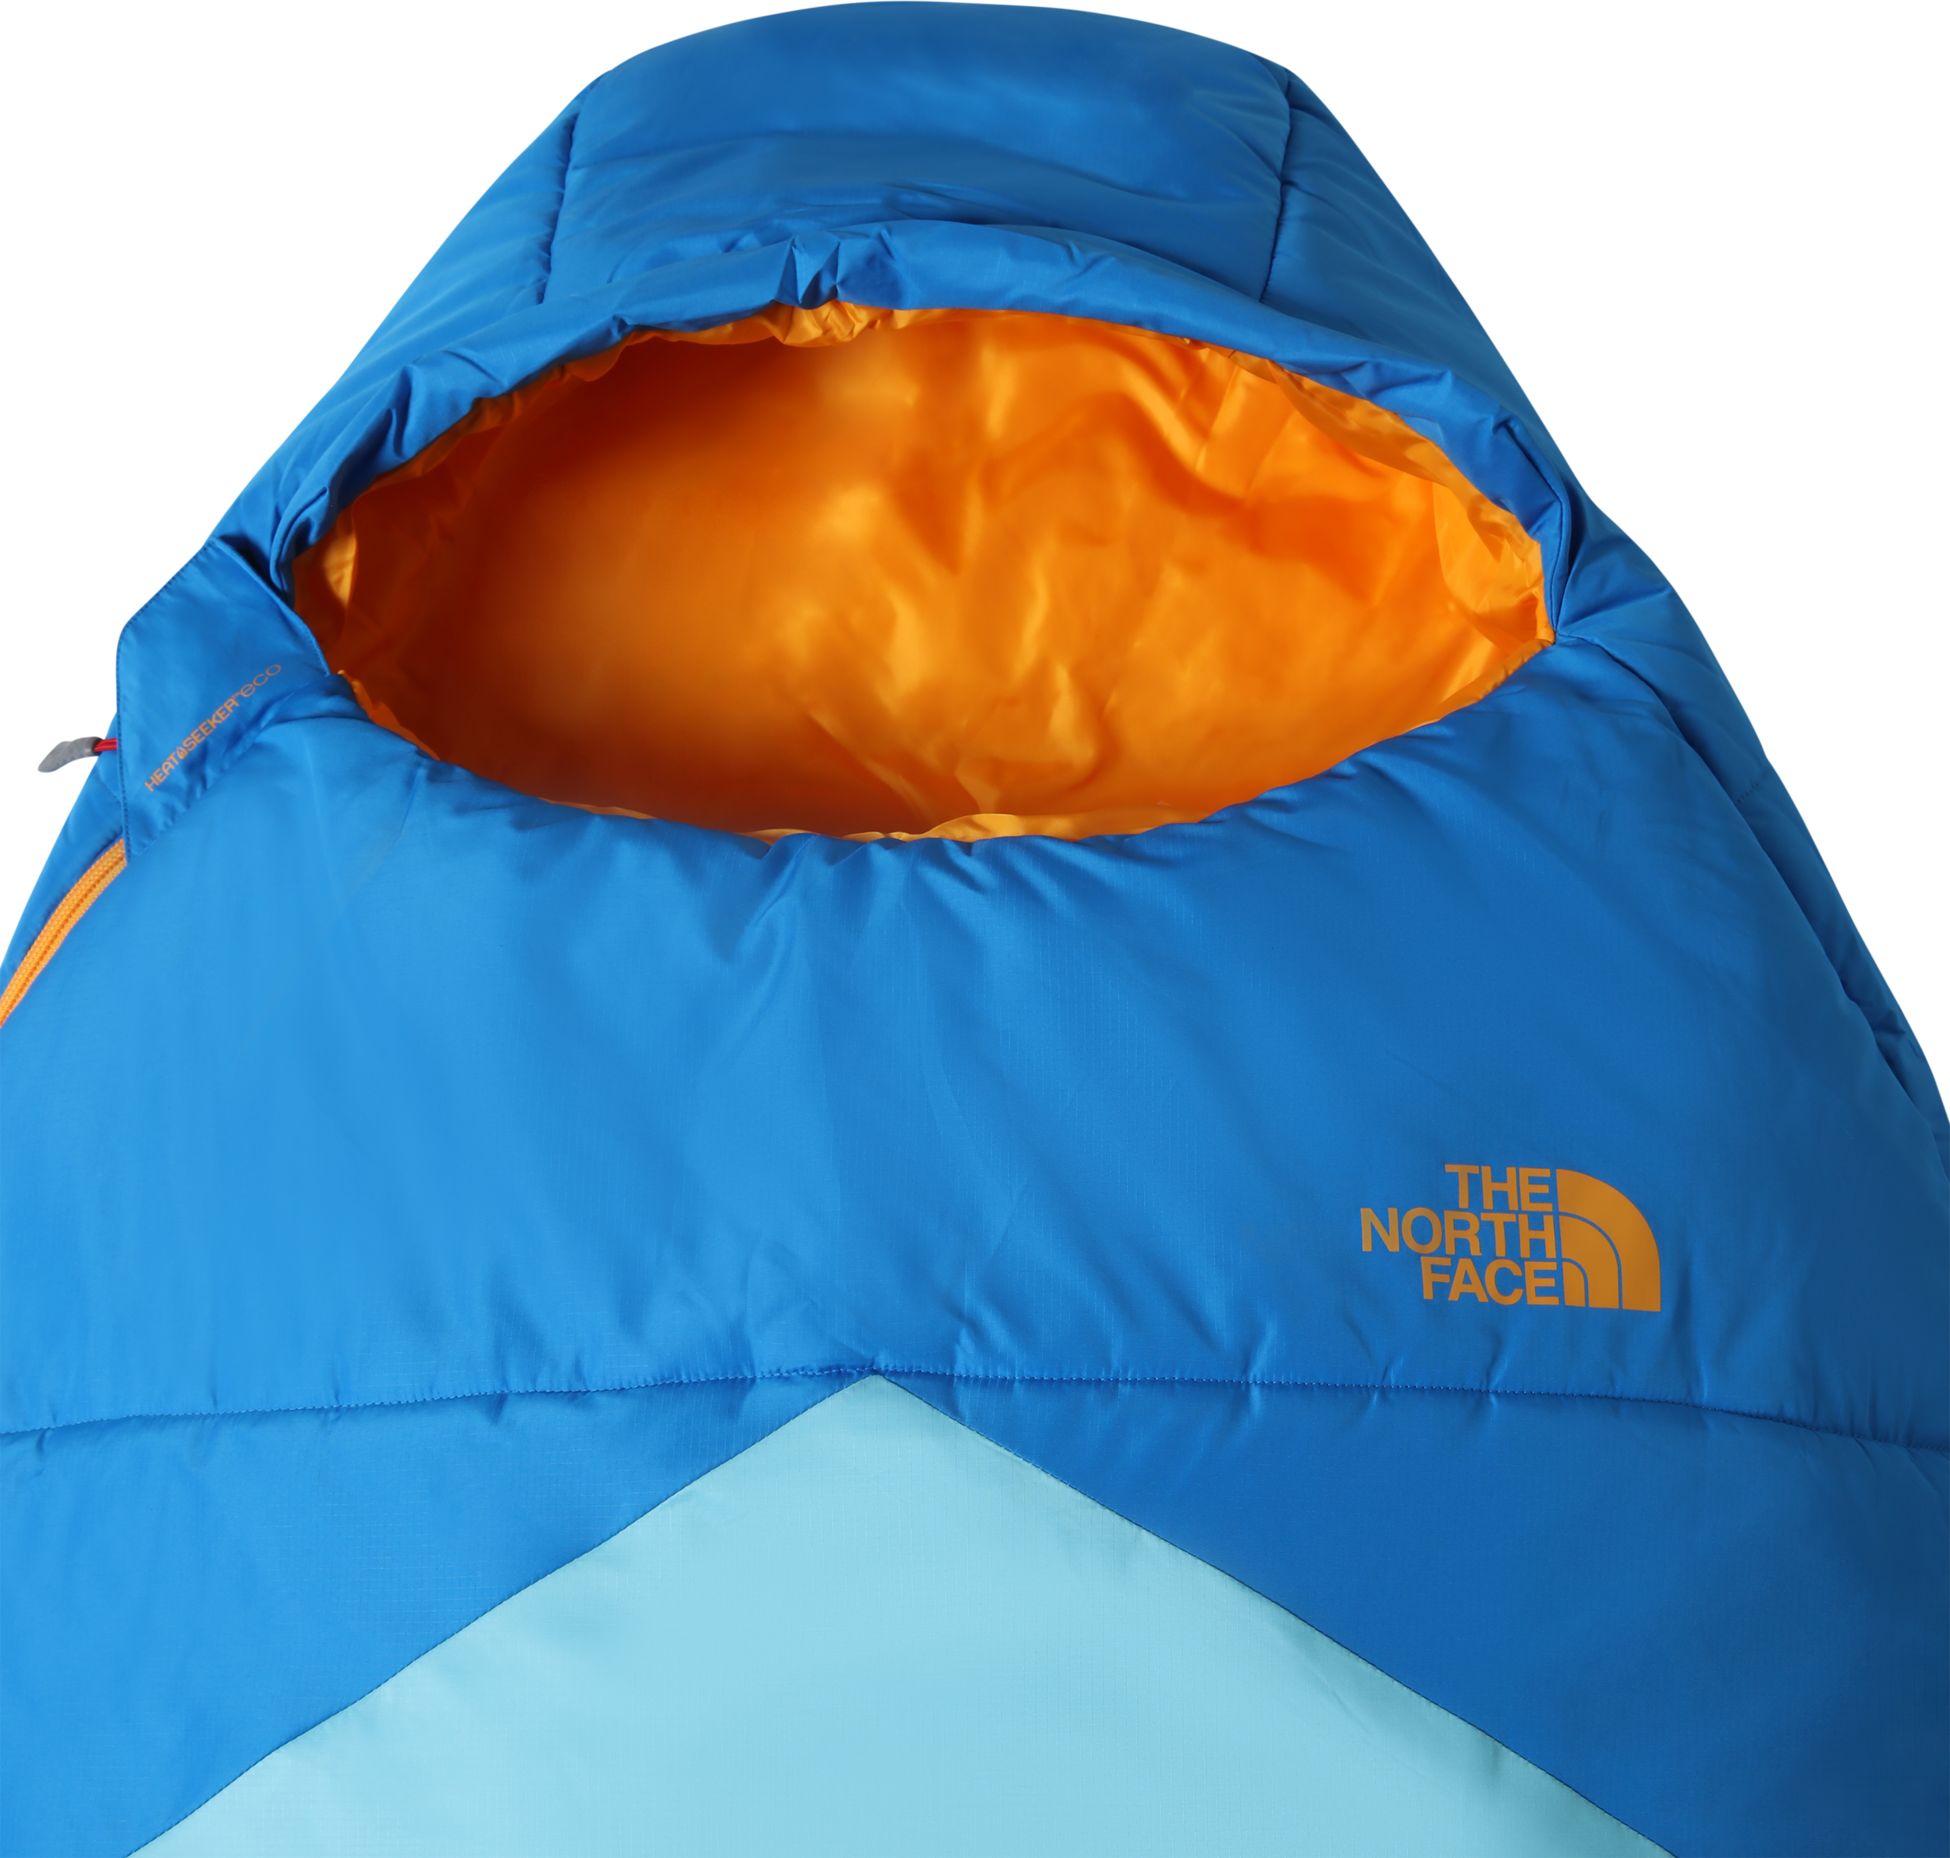 THE NORTH FACE, Y WASATCH PRO 20